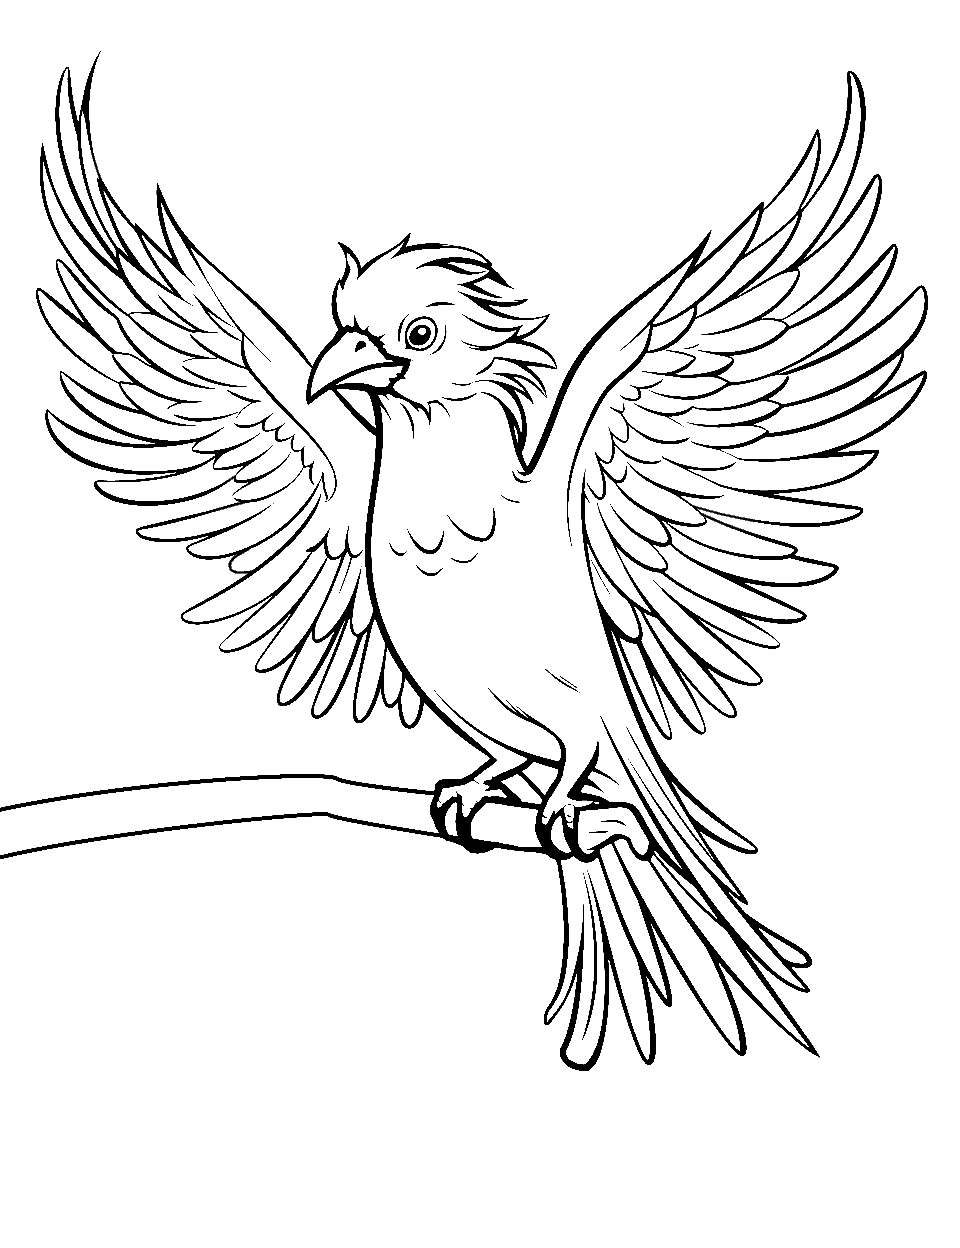 Phoenix's Sighting Coloring Page - A phoenix sitting on a tree branch.